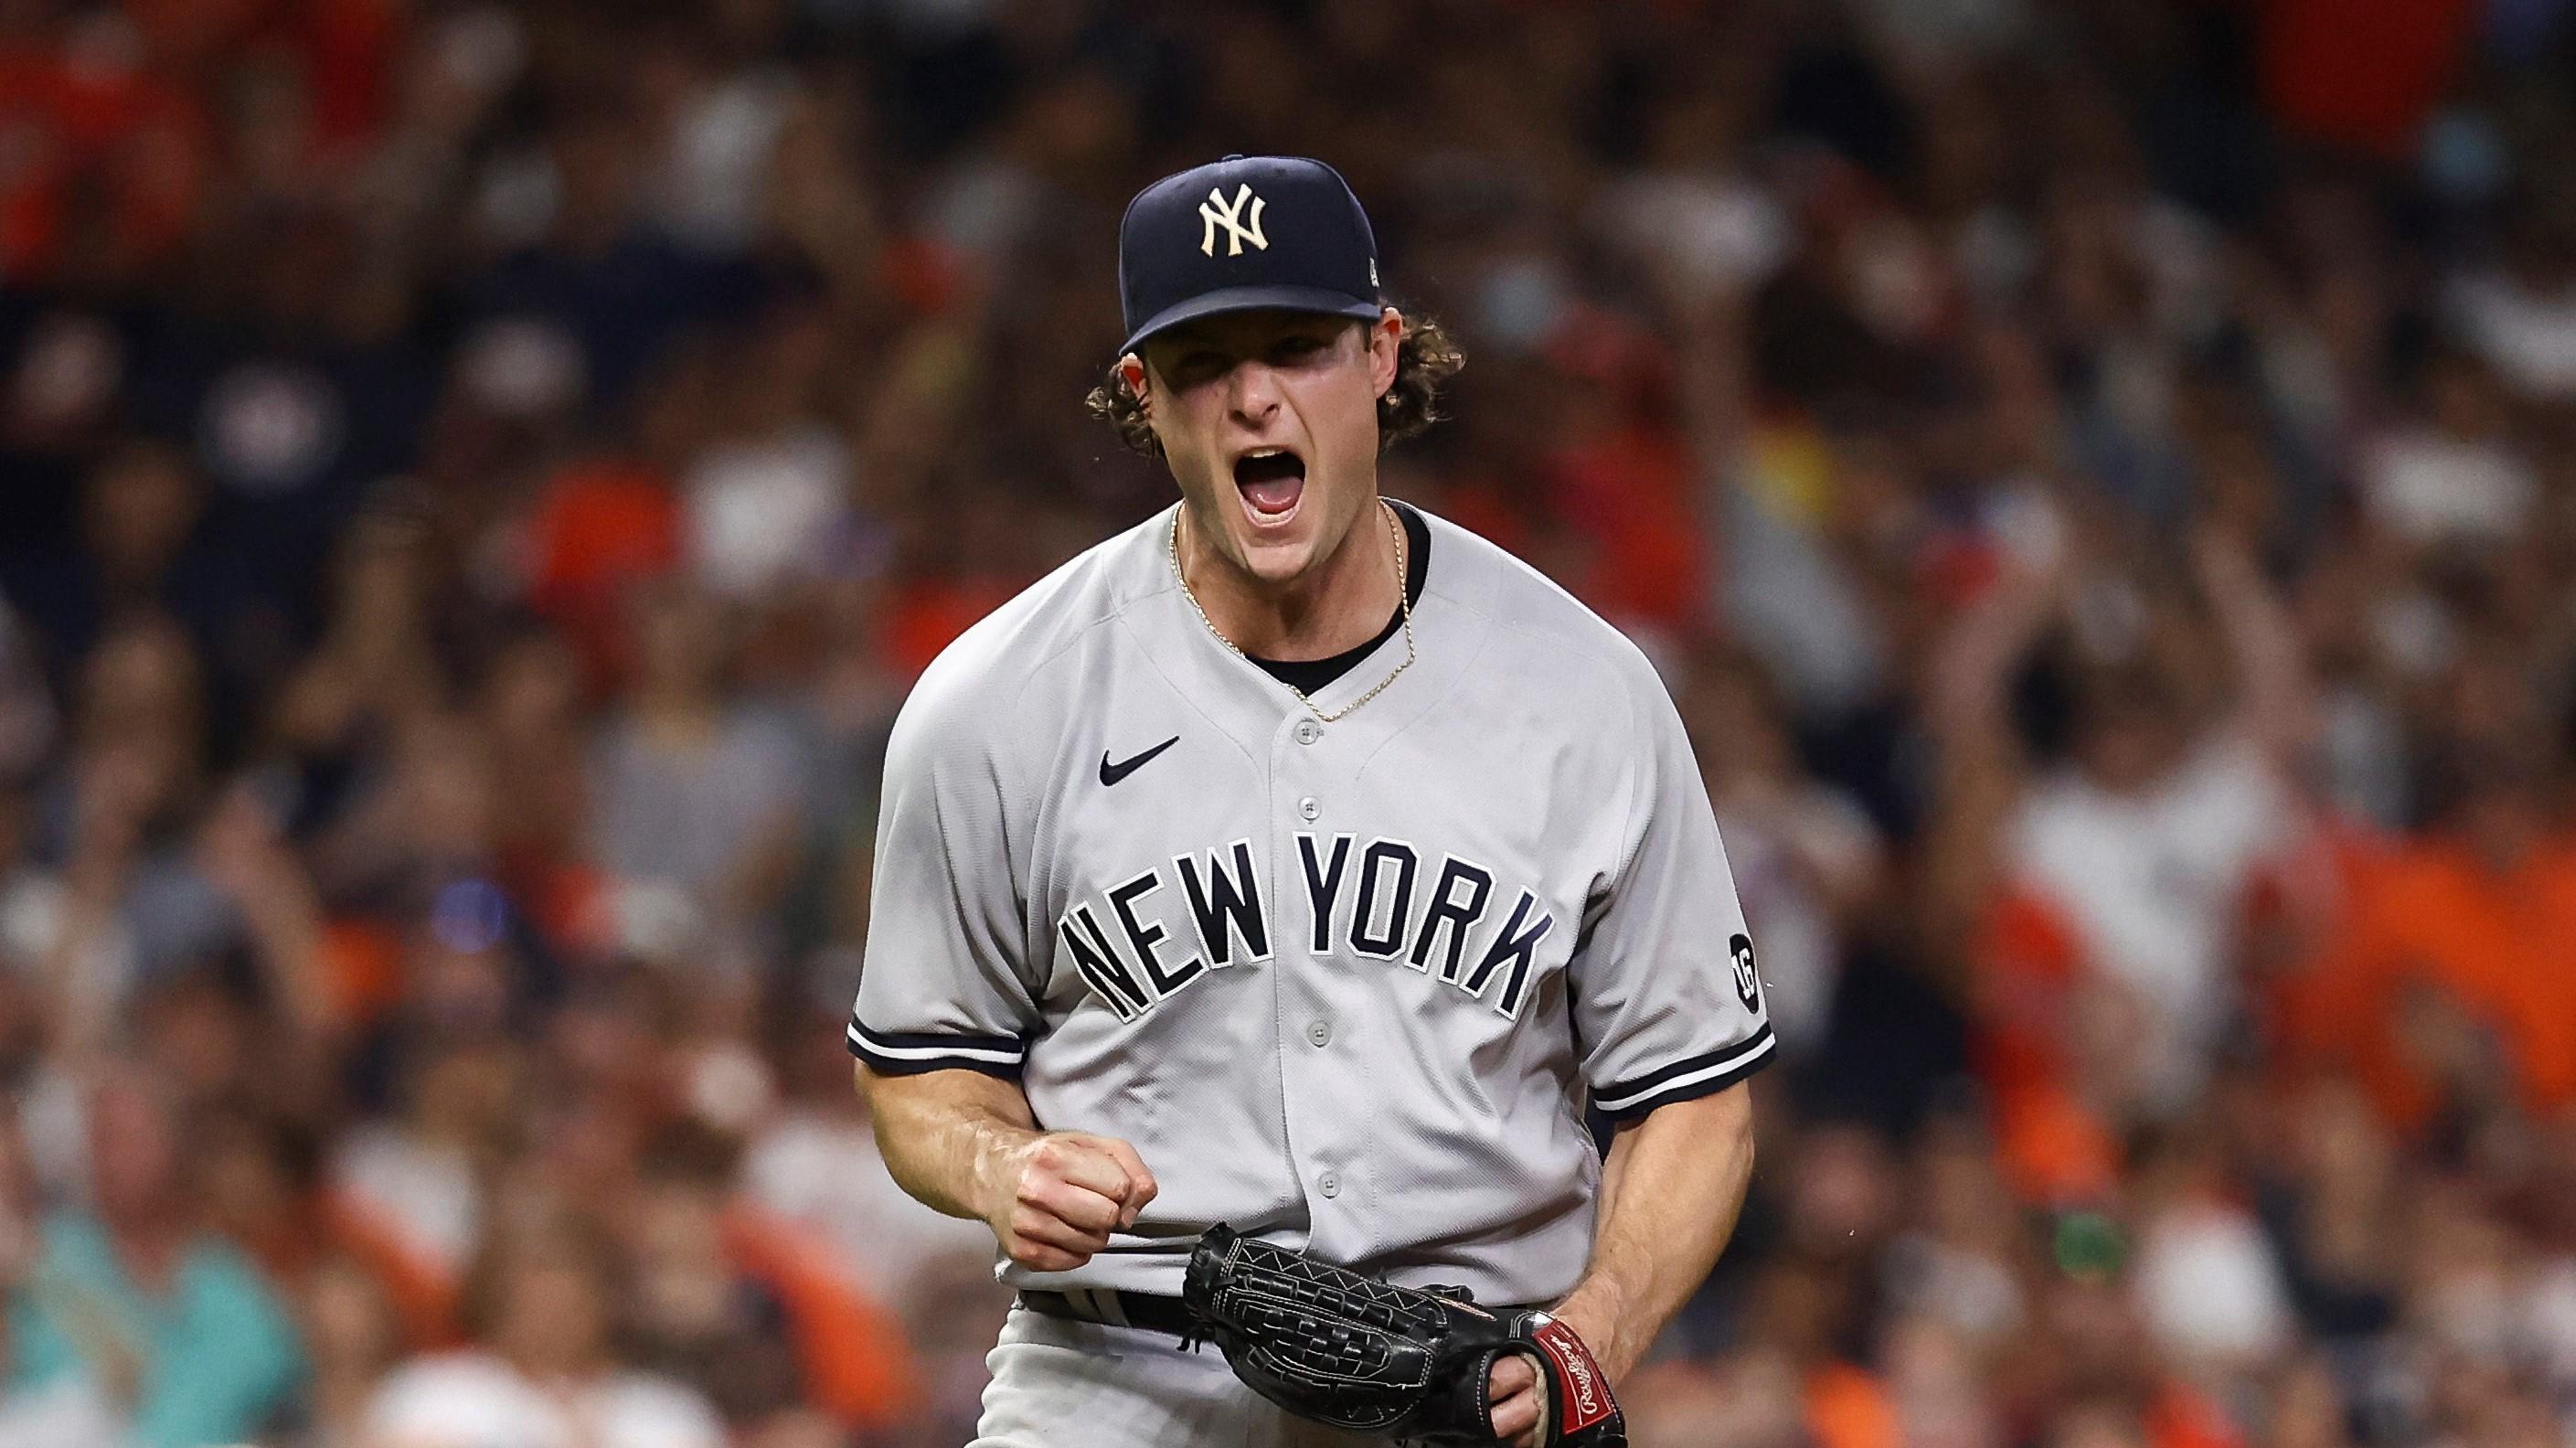 Jul 10, 2021; Houston, Texas, USA; New York Yankees starting pitcher Gerrit Cole (45) reacts after recording a strikeout against the Houston Astros to end the game at Minute Maid Park. Mandatory Credit: Troy Taormina-USA TODAY Sports / Troy Taormina-USA TODAY Sports